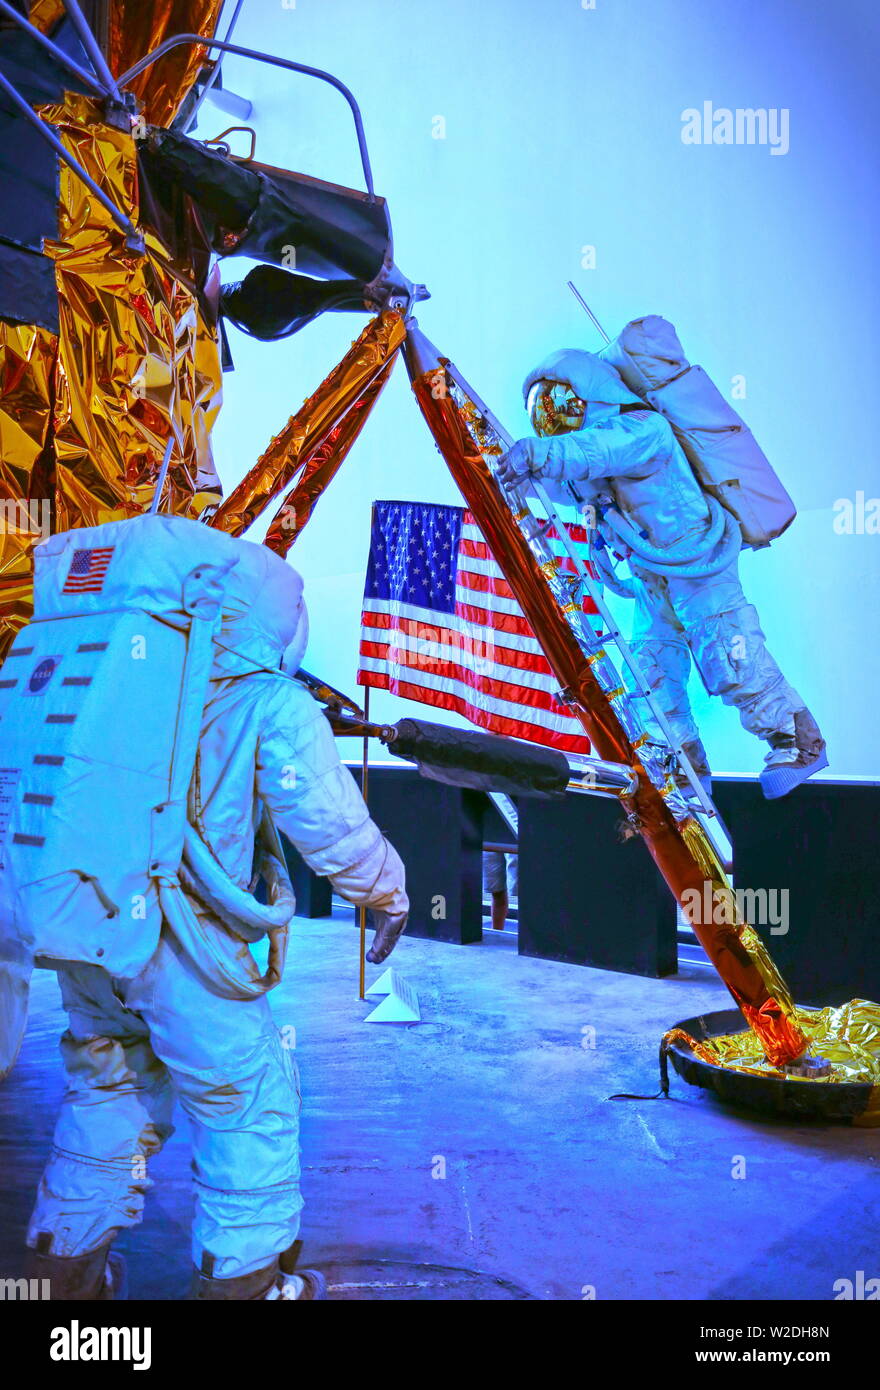 Washington DC, USA; August 2015: A scene of the famous Apollo program, two mannequins astronauts exiting their Lunar lander and walking on the Moon, a Stock Photo